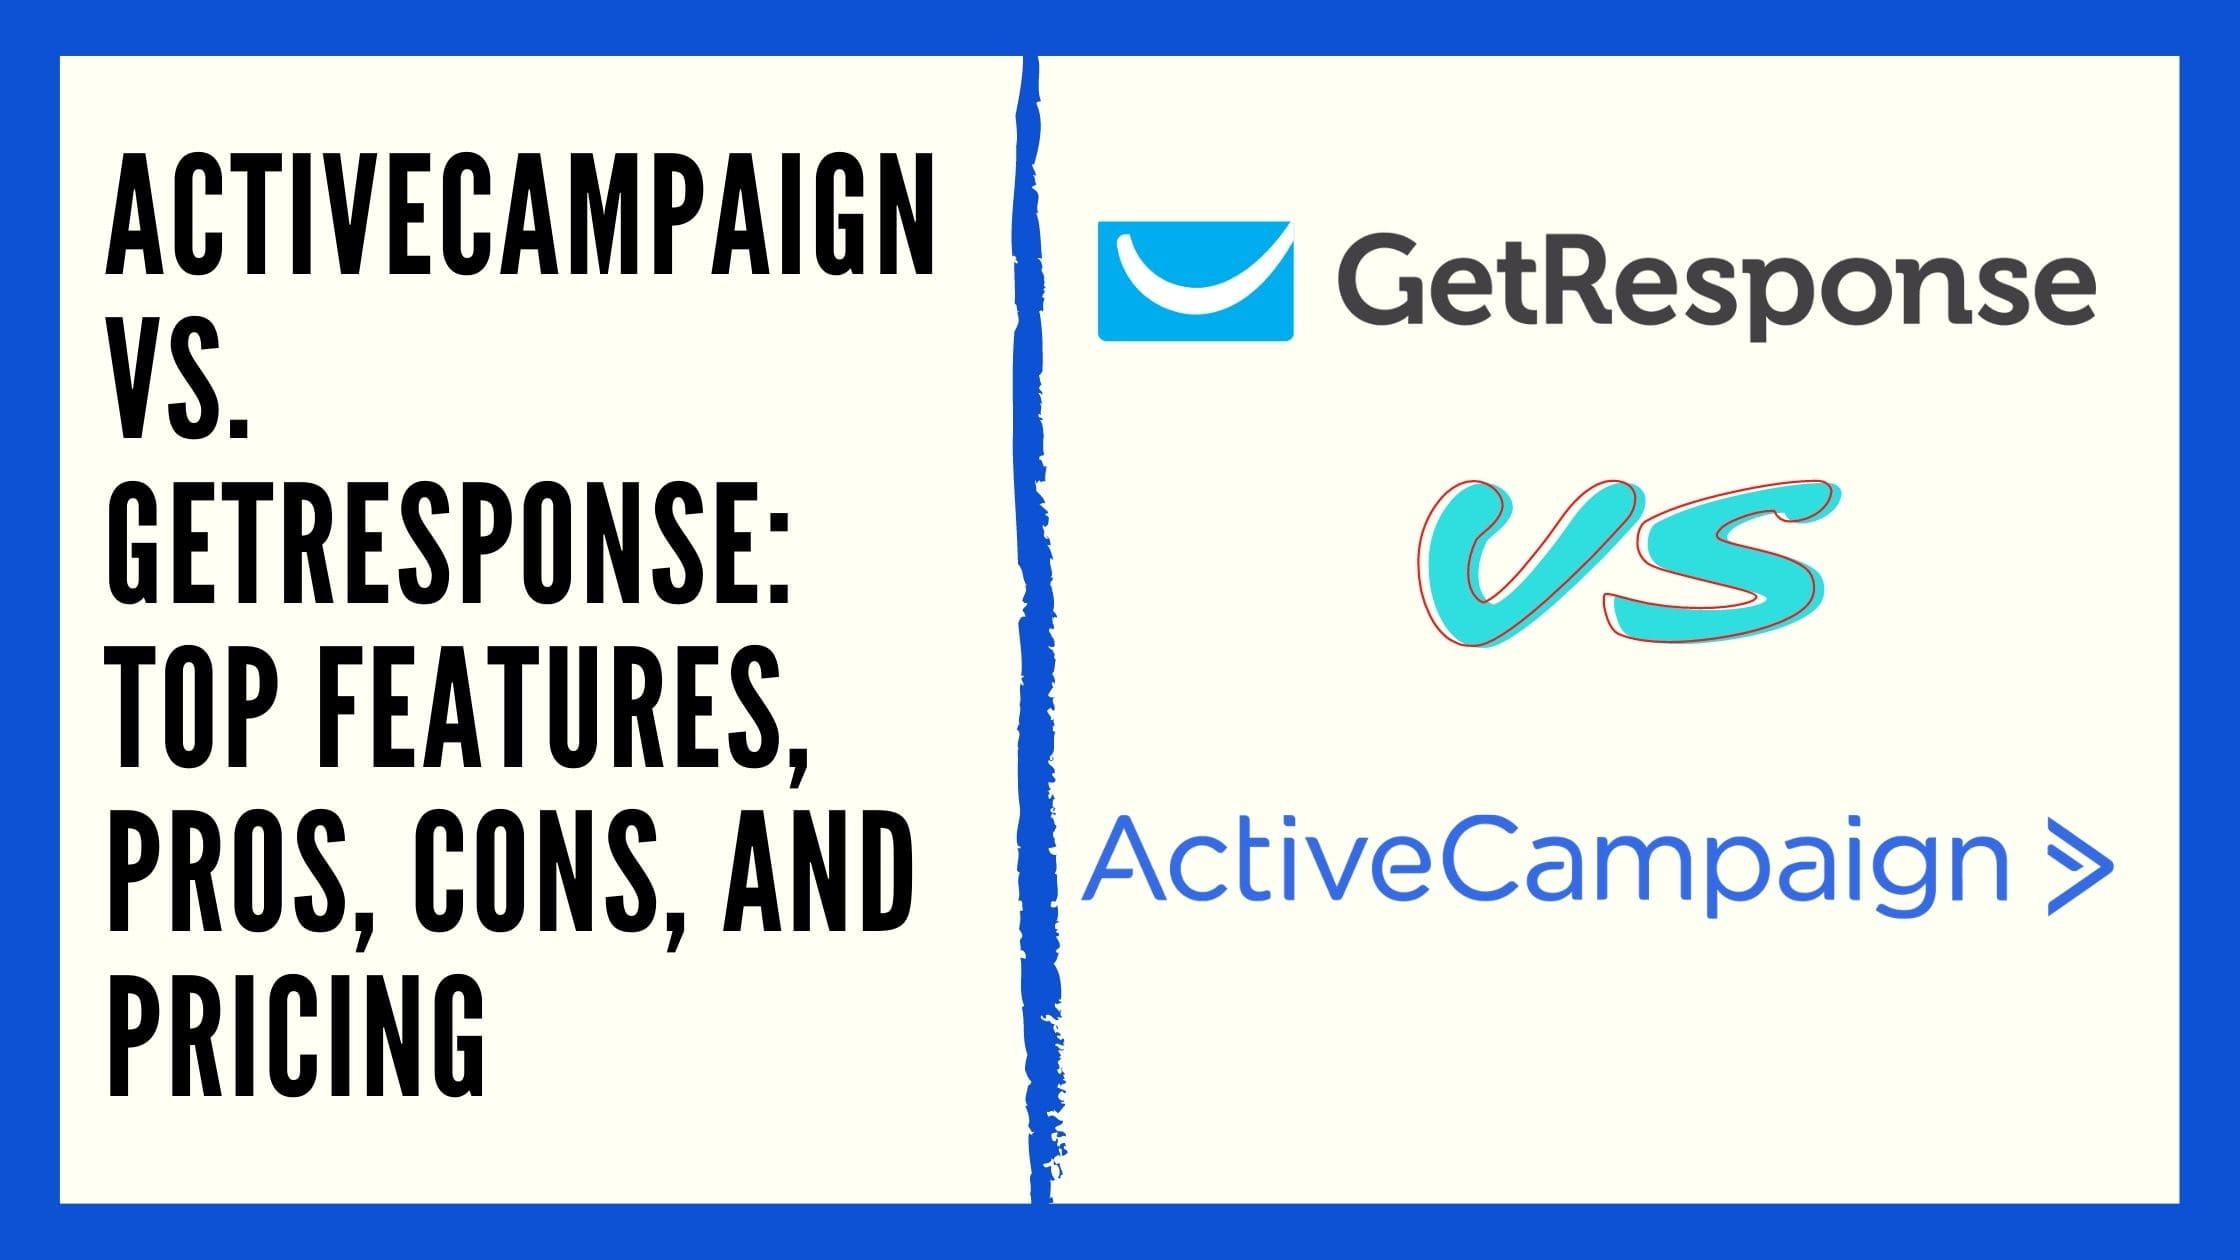 Activecampaign vs Getresponse top features, pros, cons, and pricing